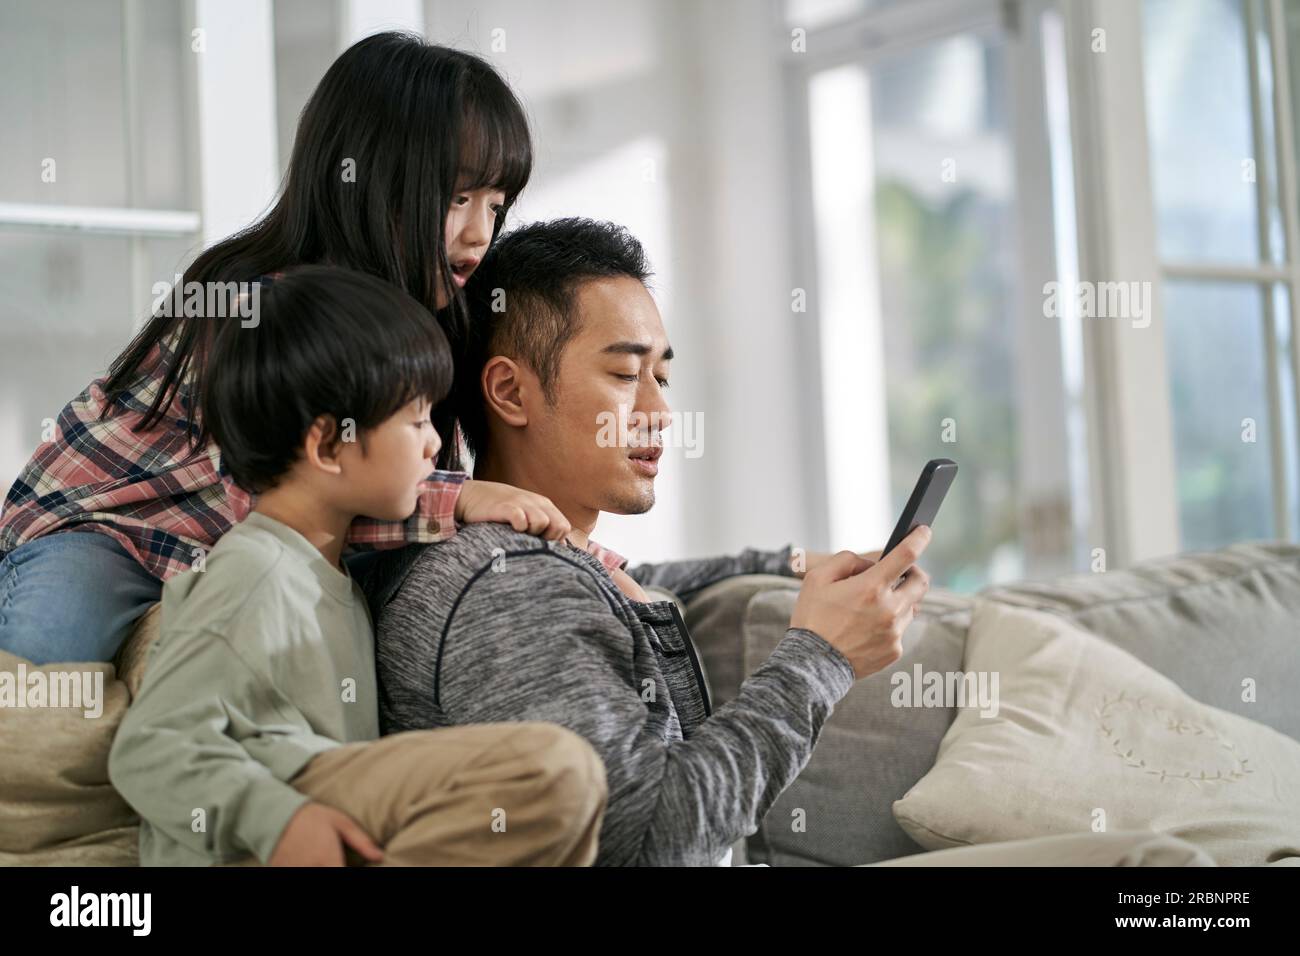 young asian father and two children sitting on family couch at home looking at mobile phone together Stock Photo